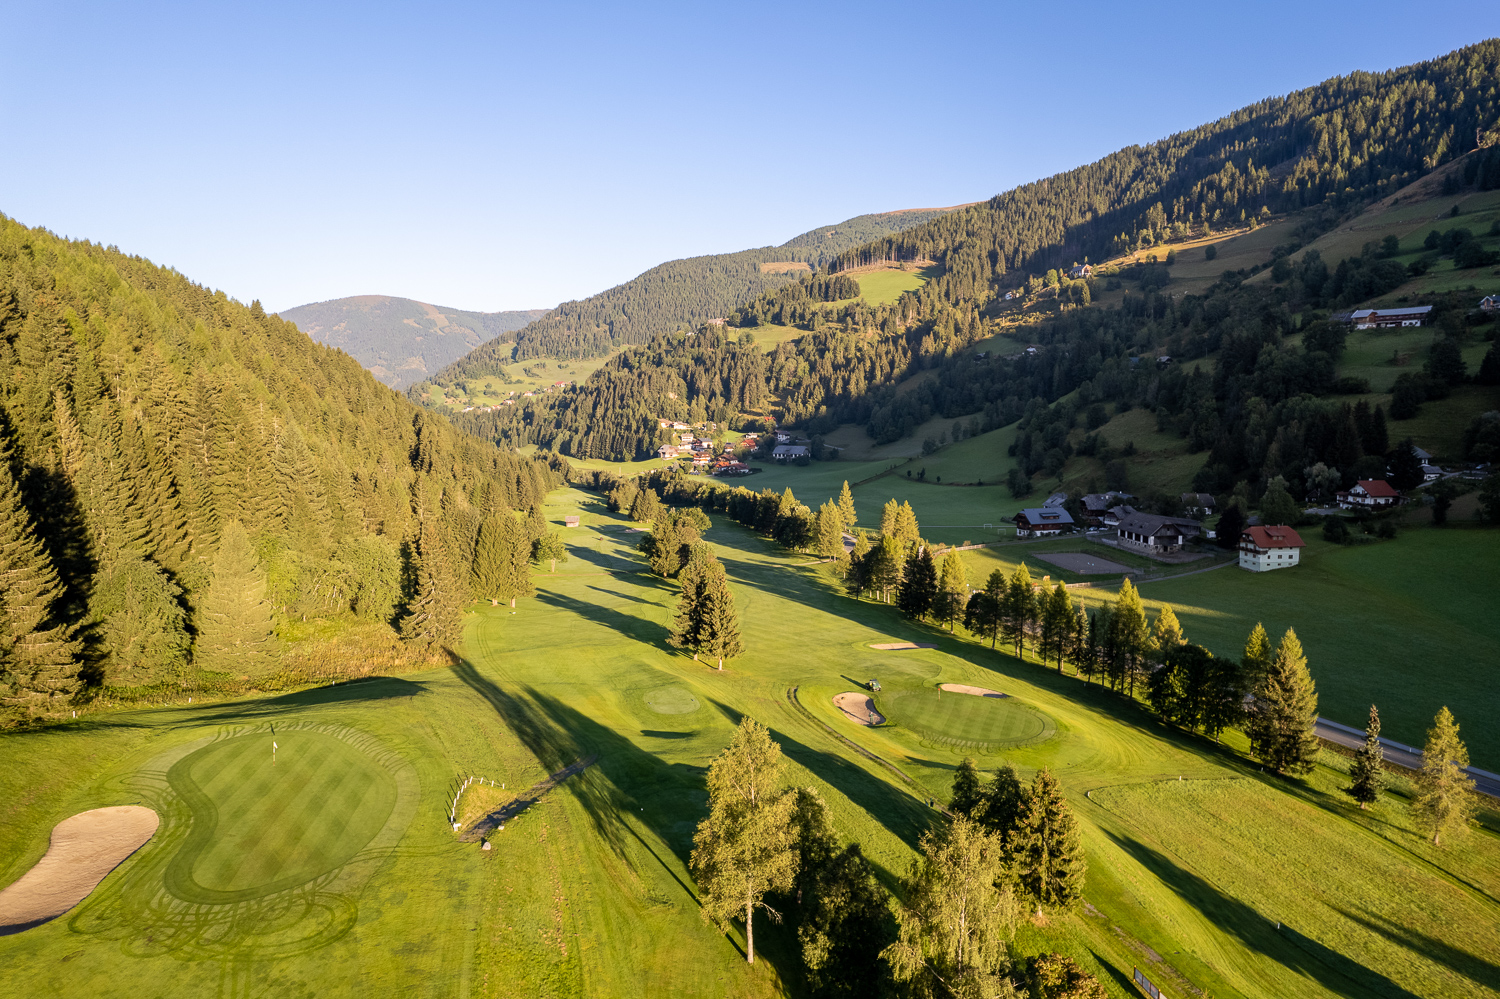 Golf vacation in Carinthia: Golf course Bad Kleinkirchheim - 18 hole golf course in the beautiful Carinthian Nockberge mountains.